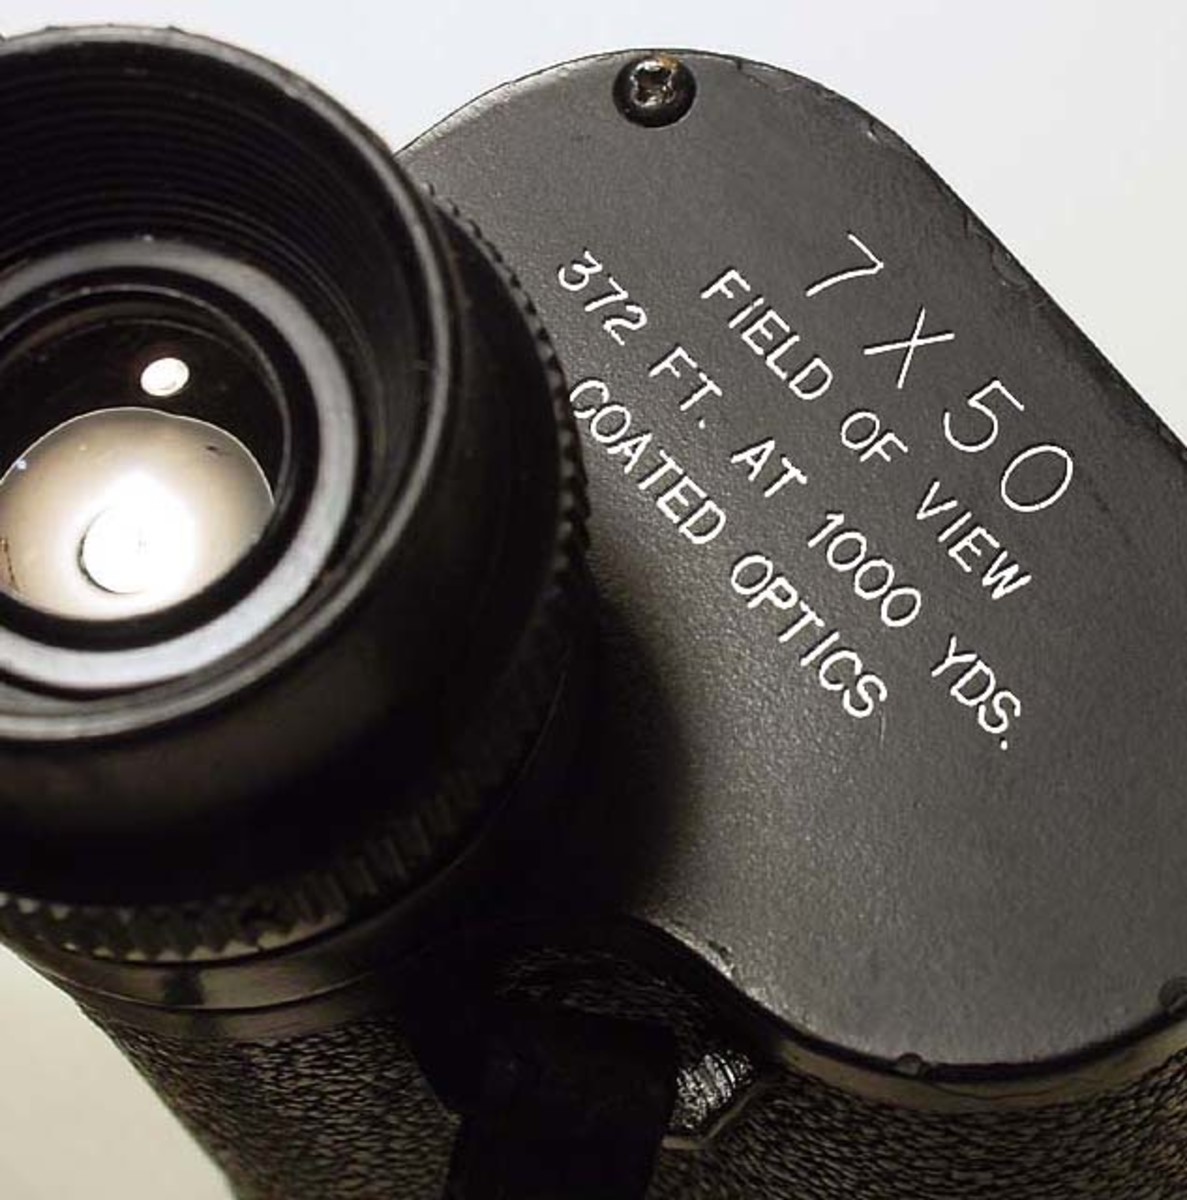 An example of the two figures that matter greatly when choosing binoculars. The 7 denotes the magnification, whilst the 50 is the diameter.